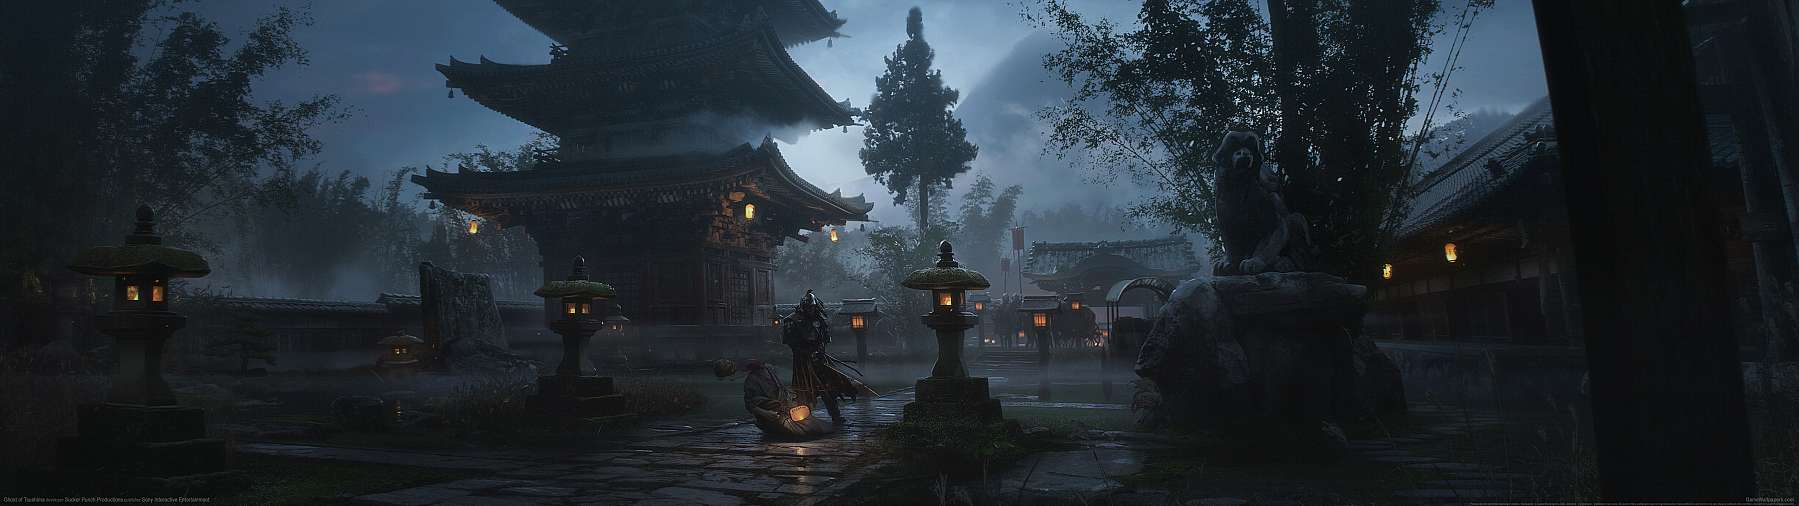 Ghost of Tsushima superwide achtergrond 08